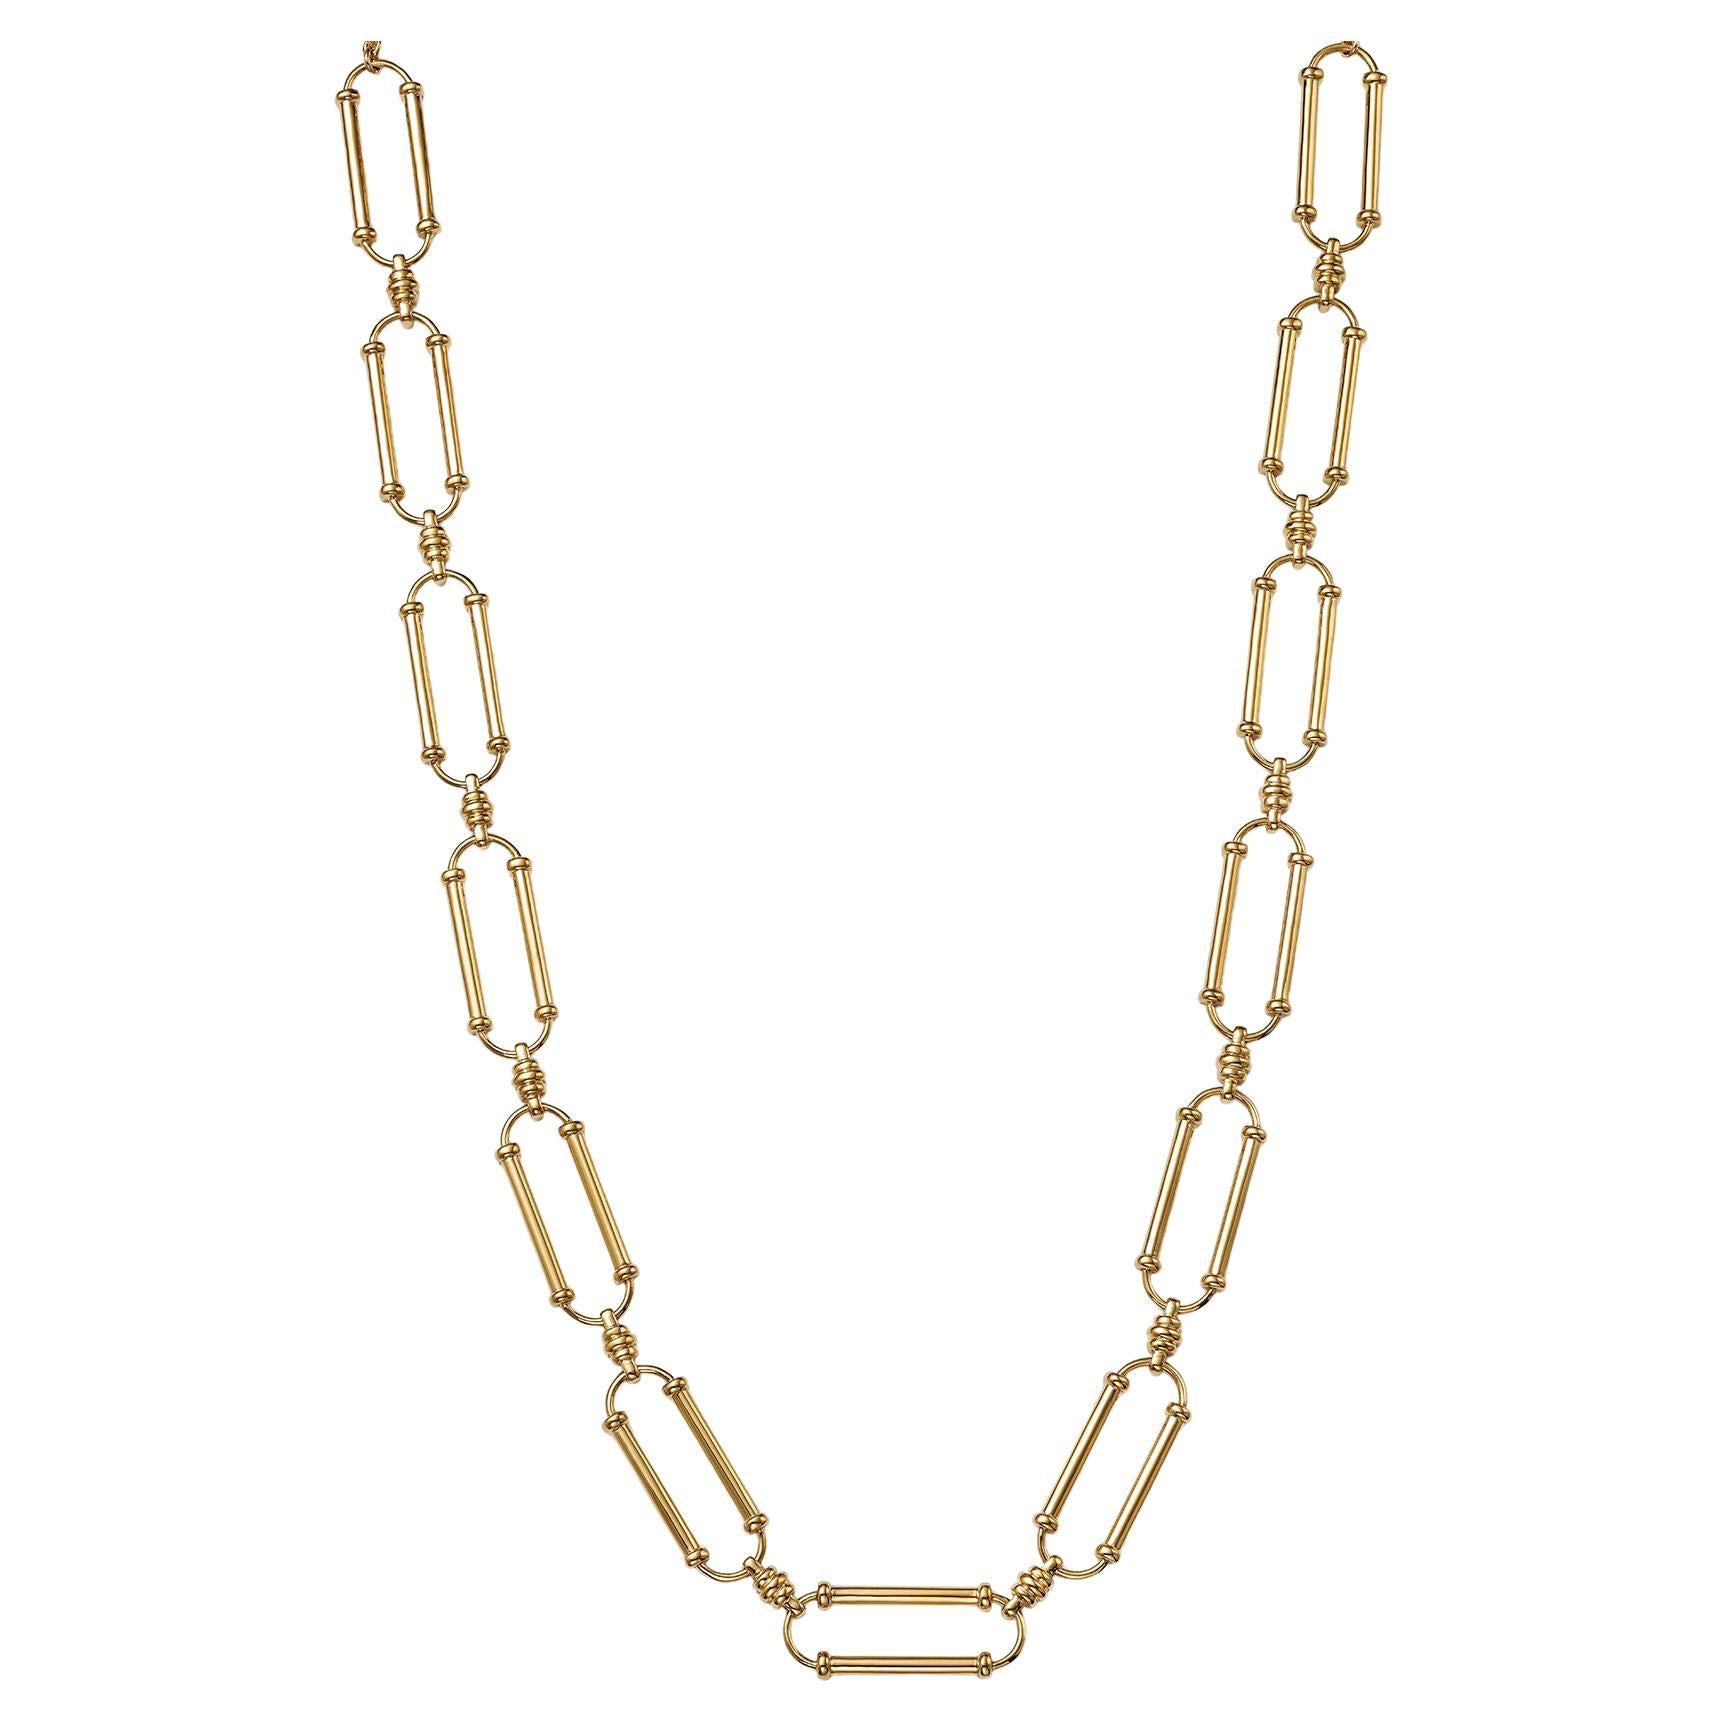 Paperclip Style Oval Link Celeste Chain in 18kt Fairmined Ecological Yellow Gold For Sale